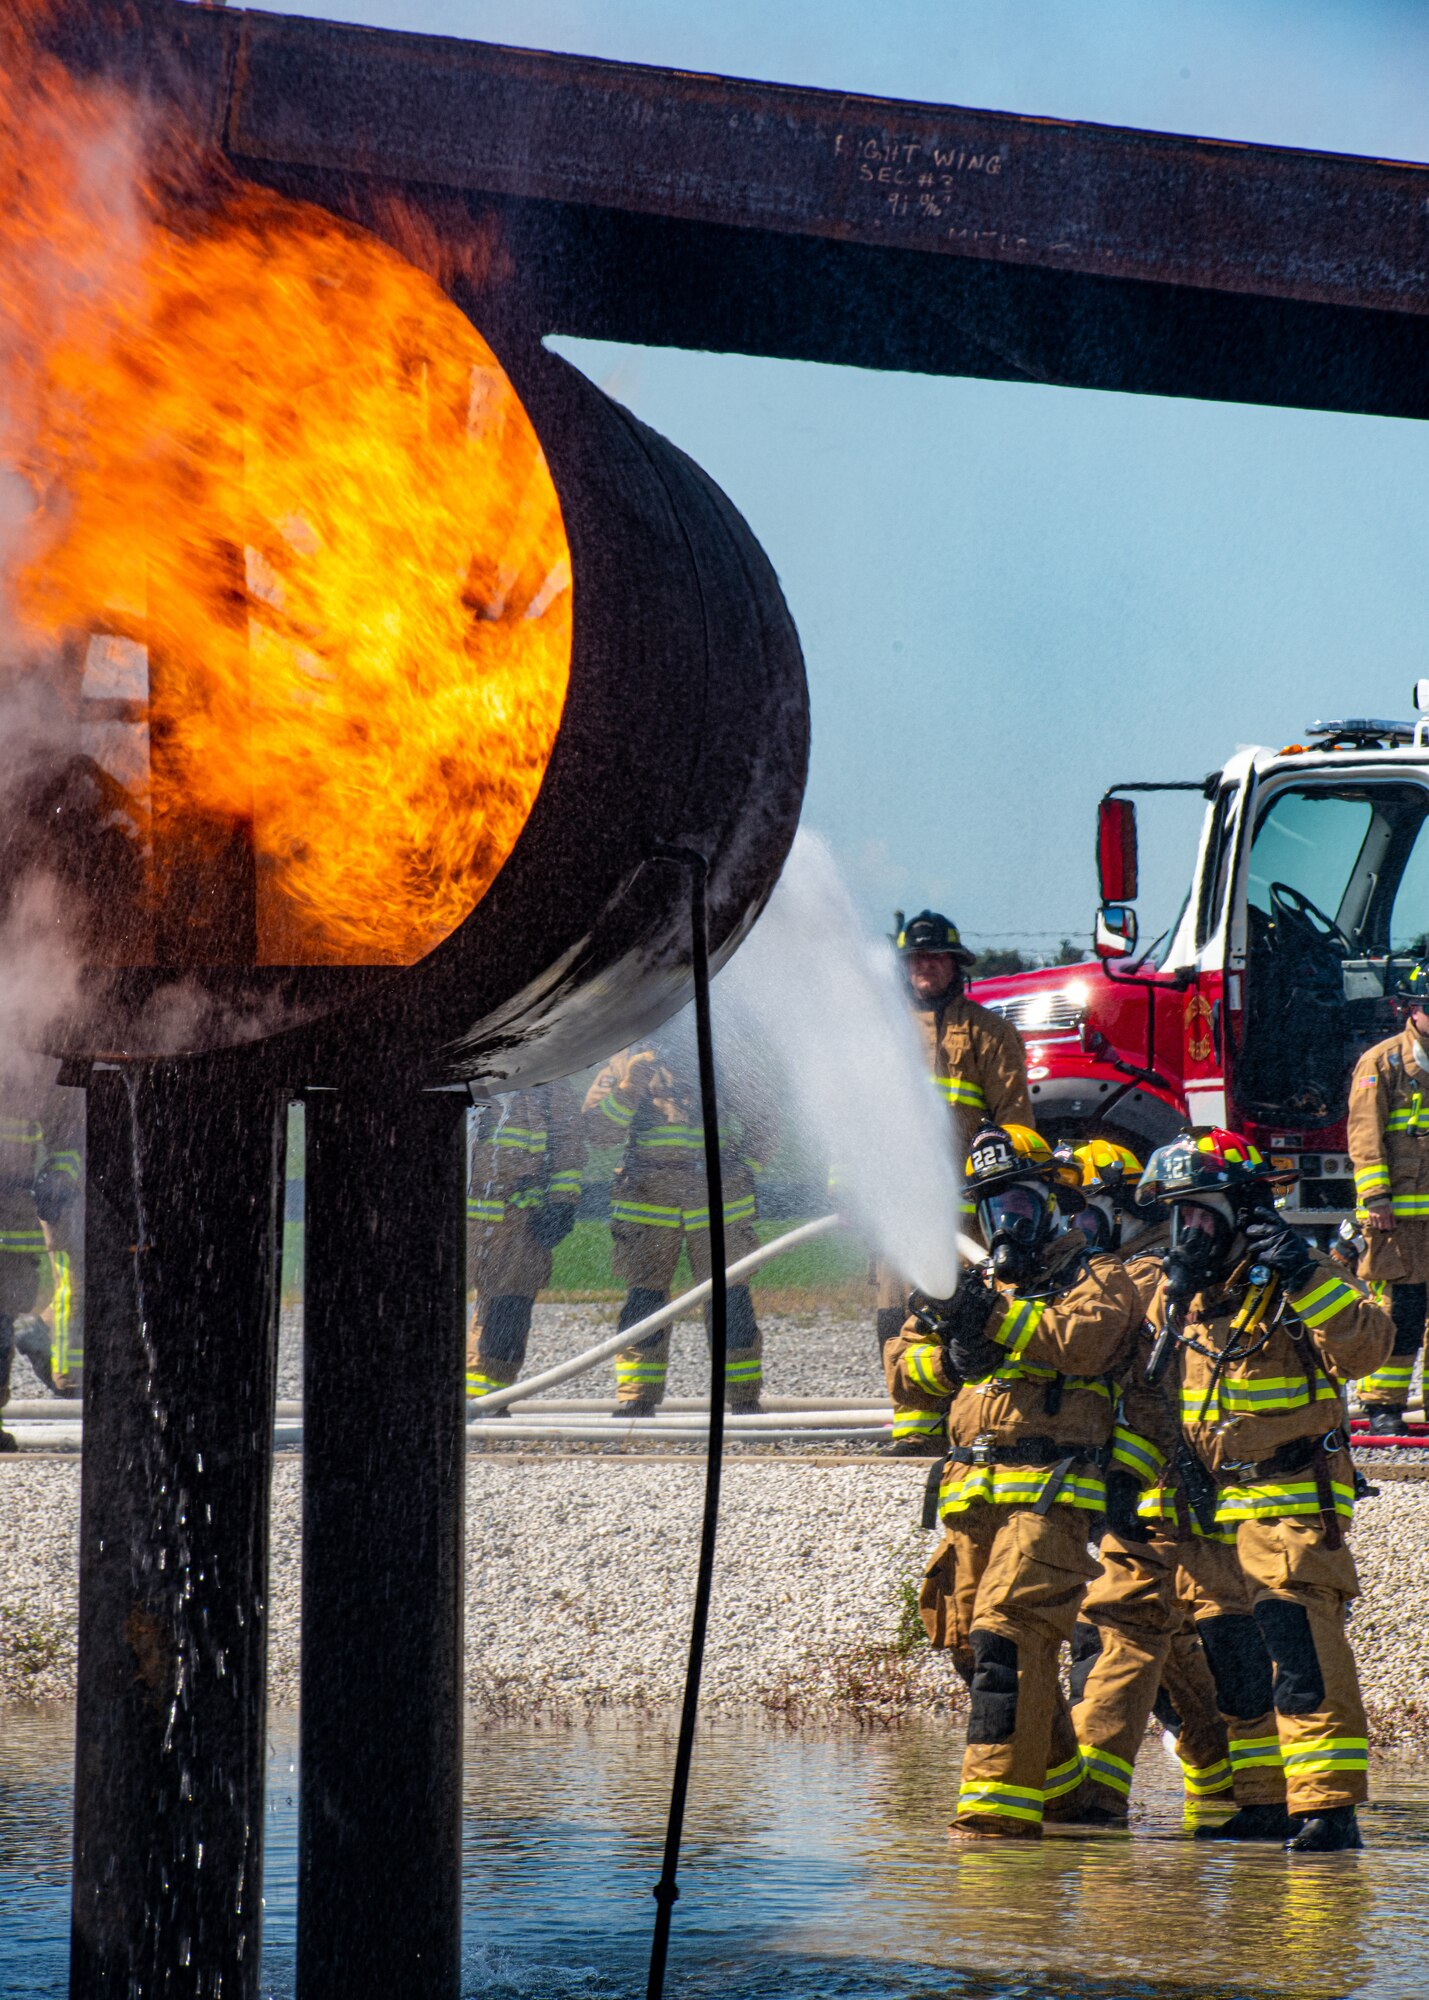 Firefighters from Rickenbacker Air National Guard fight an external aircraft fire, Sept. 9, 2020, at Youngstown Air Reserve Station’s burn pit. About 40 Citizen Airmen from RANG’s fire department came to the 910th Airlift Wing, Sept. 8-10, to do their annual live-fire training.